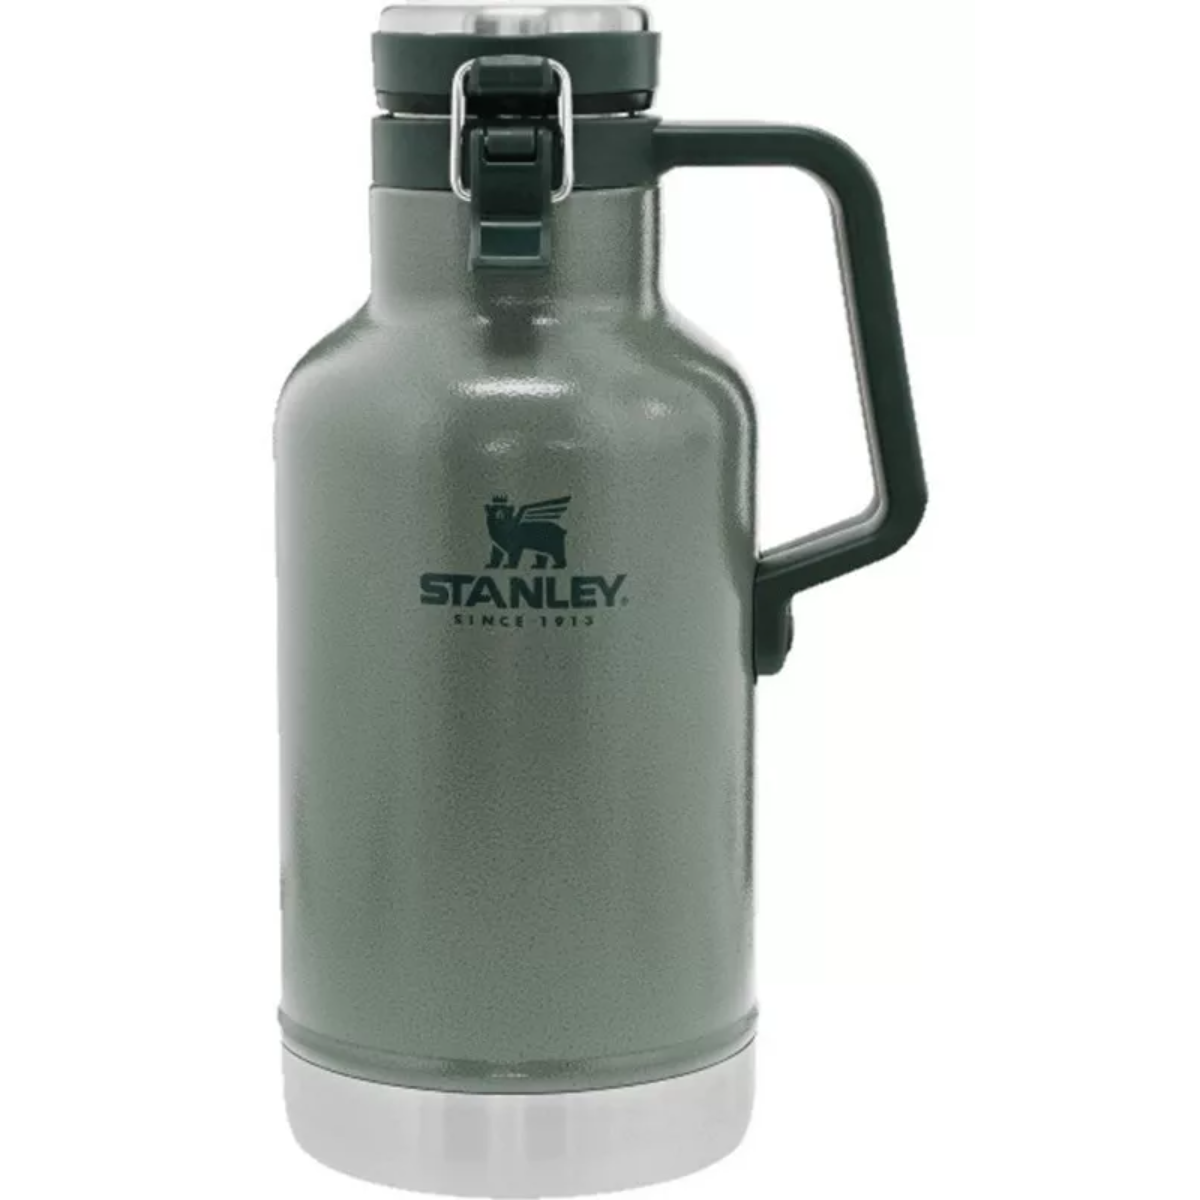 Termo Stanley Original Mate System Classic 1.2 Litros - Aire y Sol